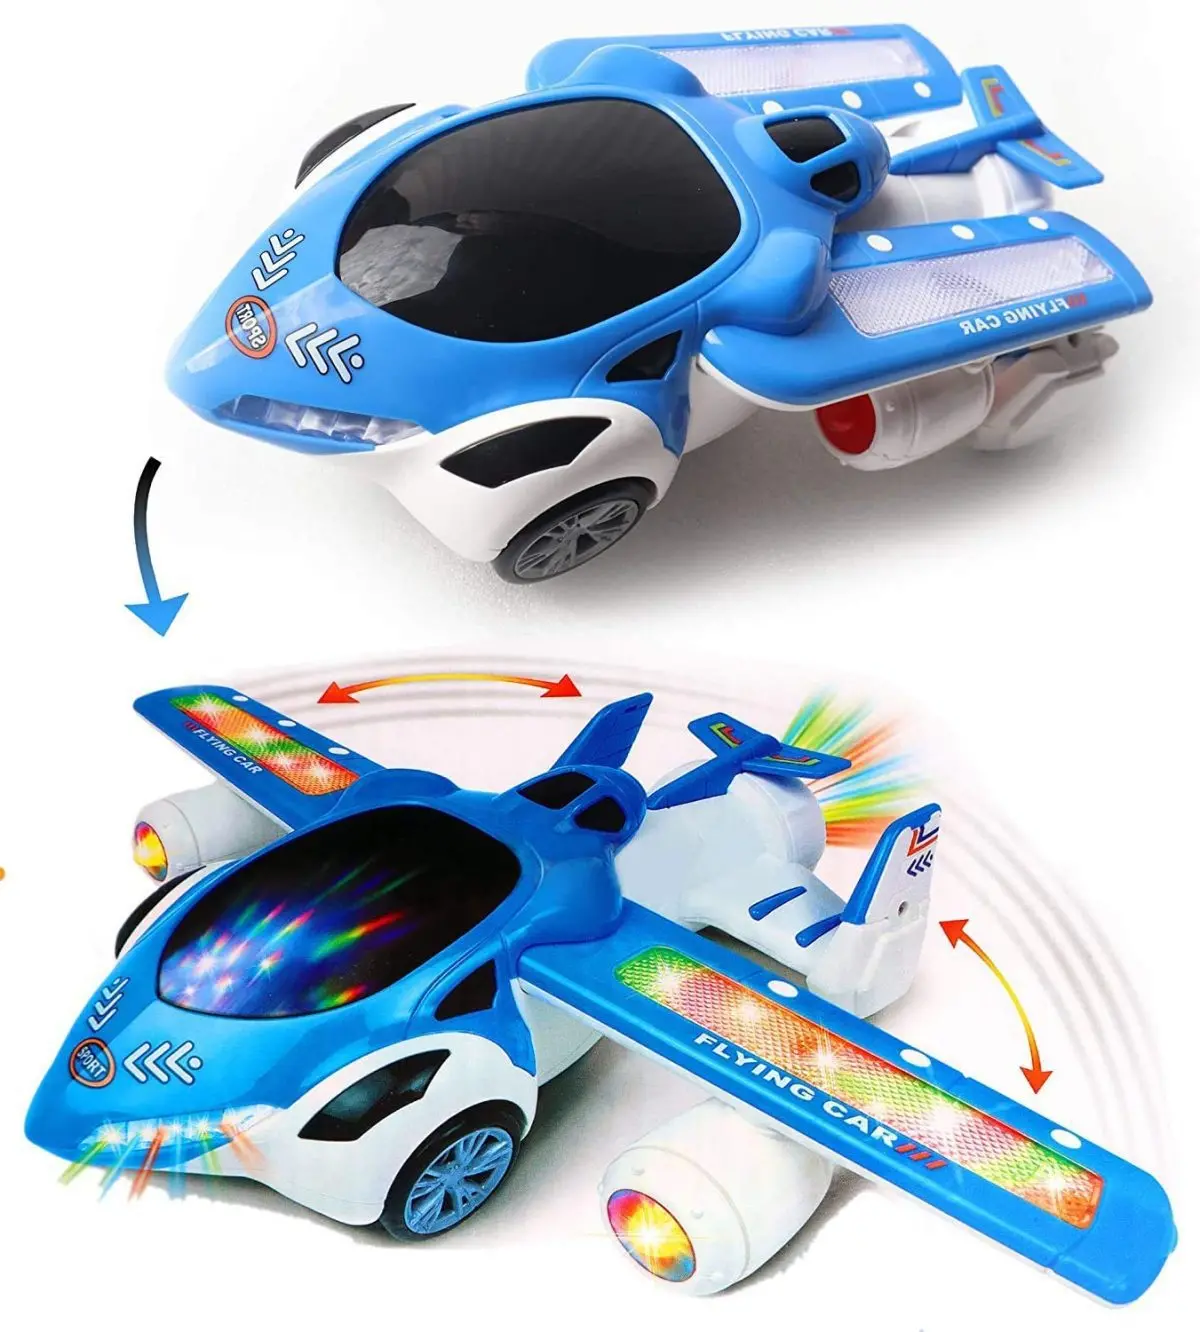 Trade Globe Flying Toy Car with 360 Degree Rotation & Automatic Wing Opening, Music and Lights, Bump and Go Action, Battery Operated Toy for Kids Boys & Girls